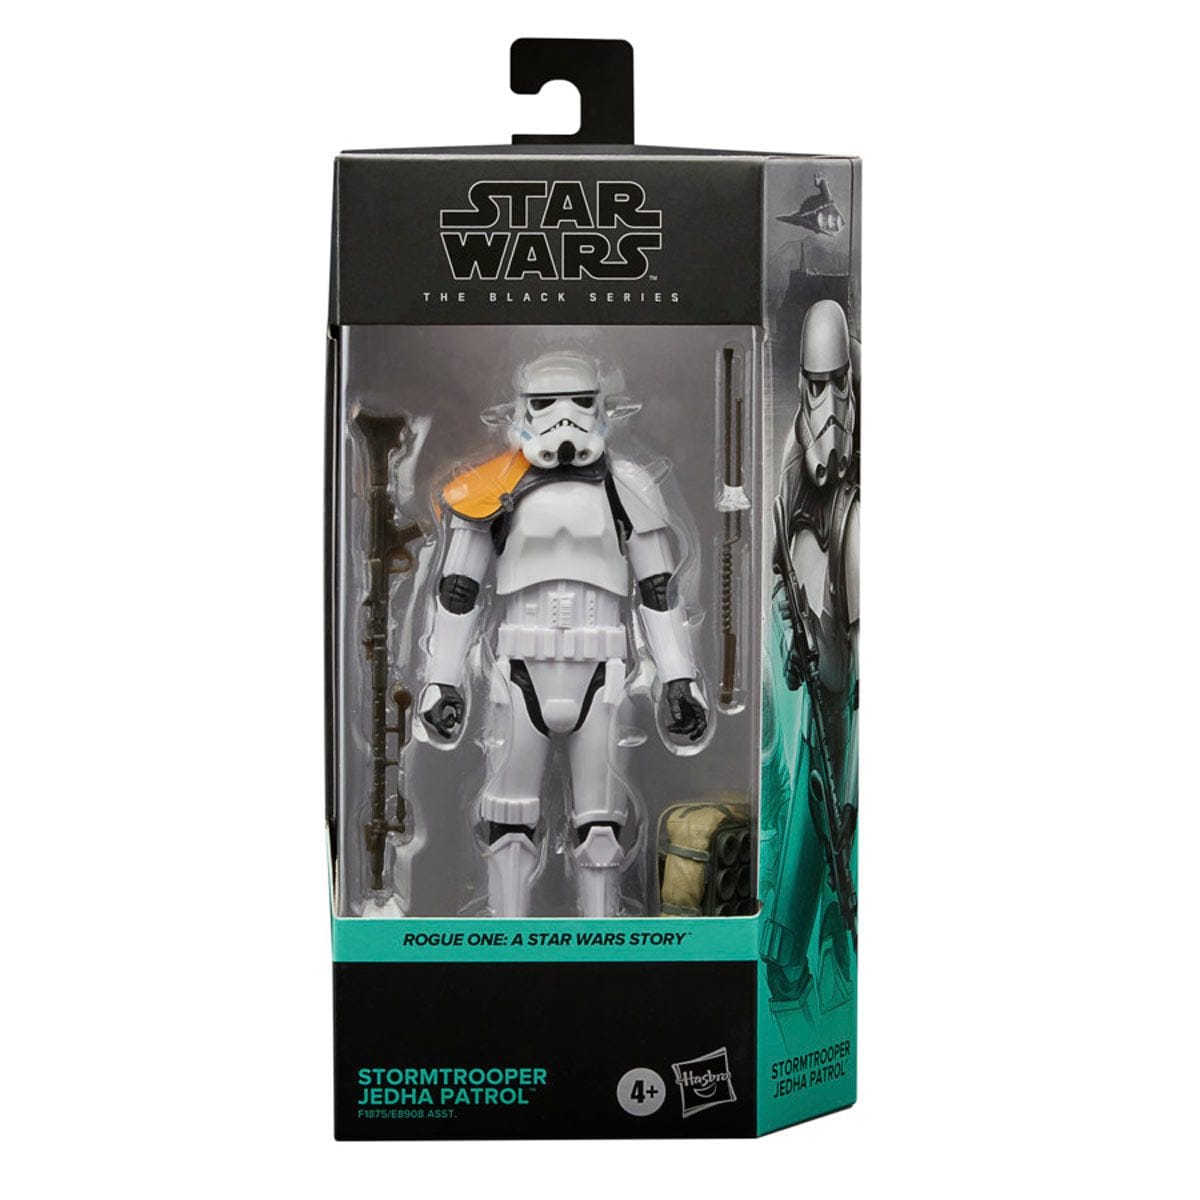 Star Wars The Black Series Stormtrooper Jedha Patrol 6-Inch Action Figure in box